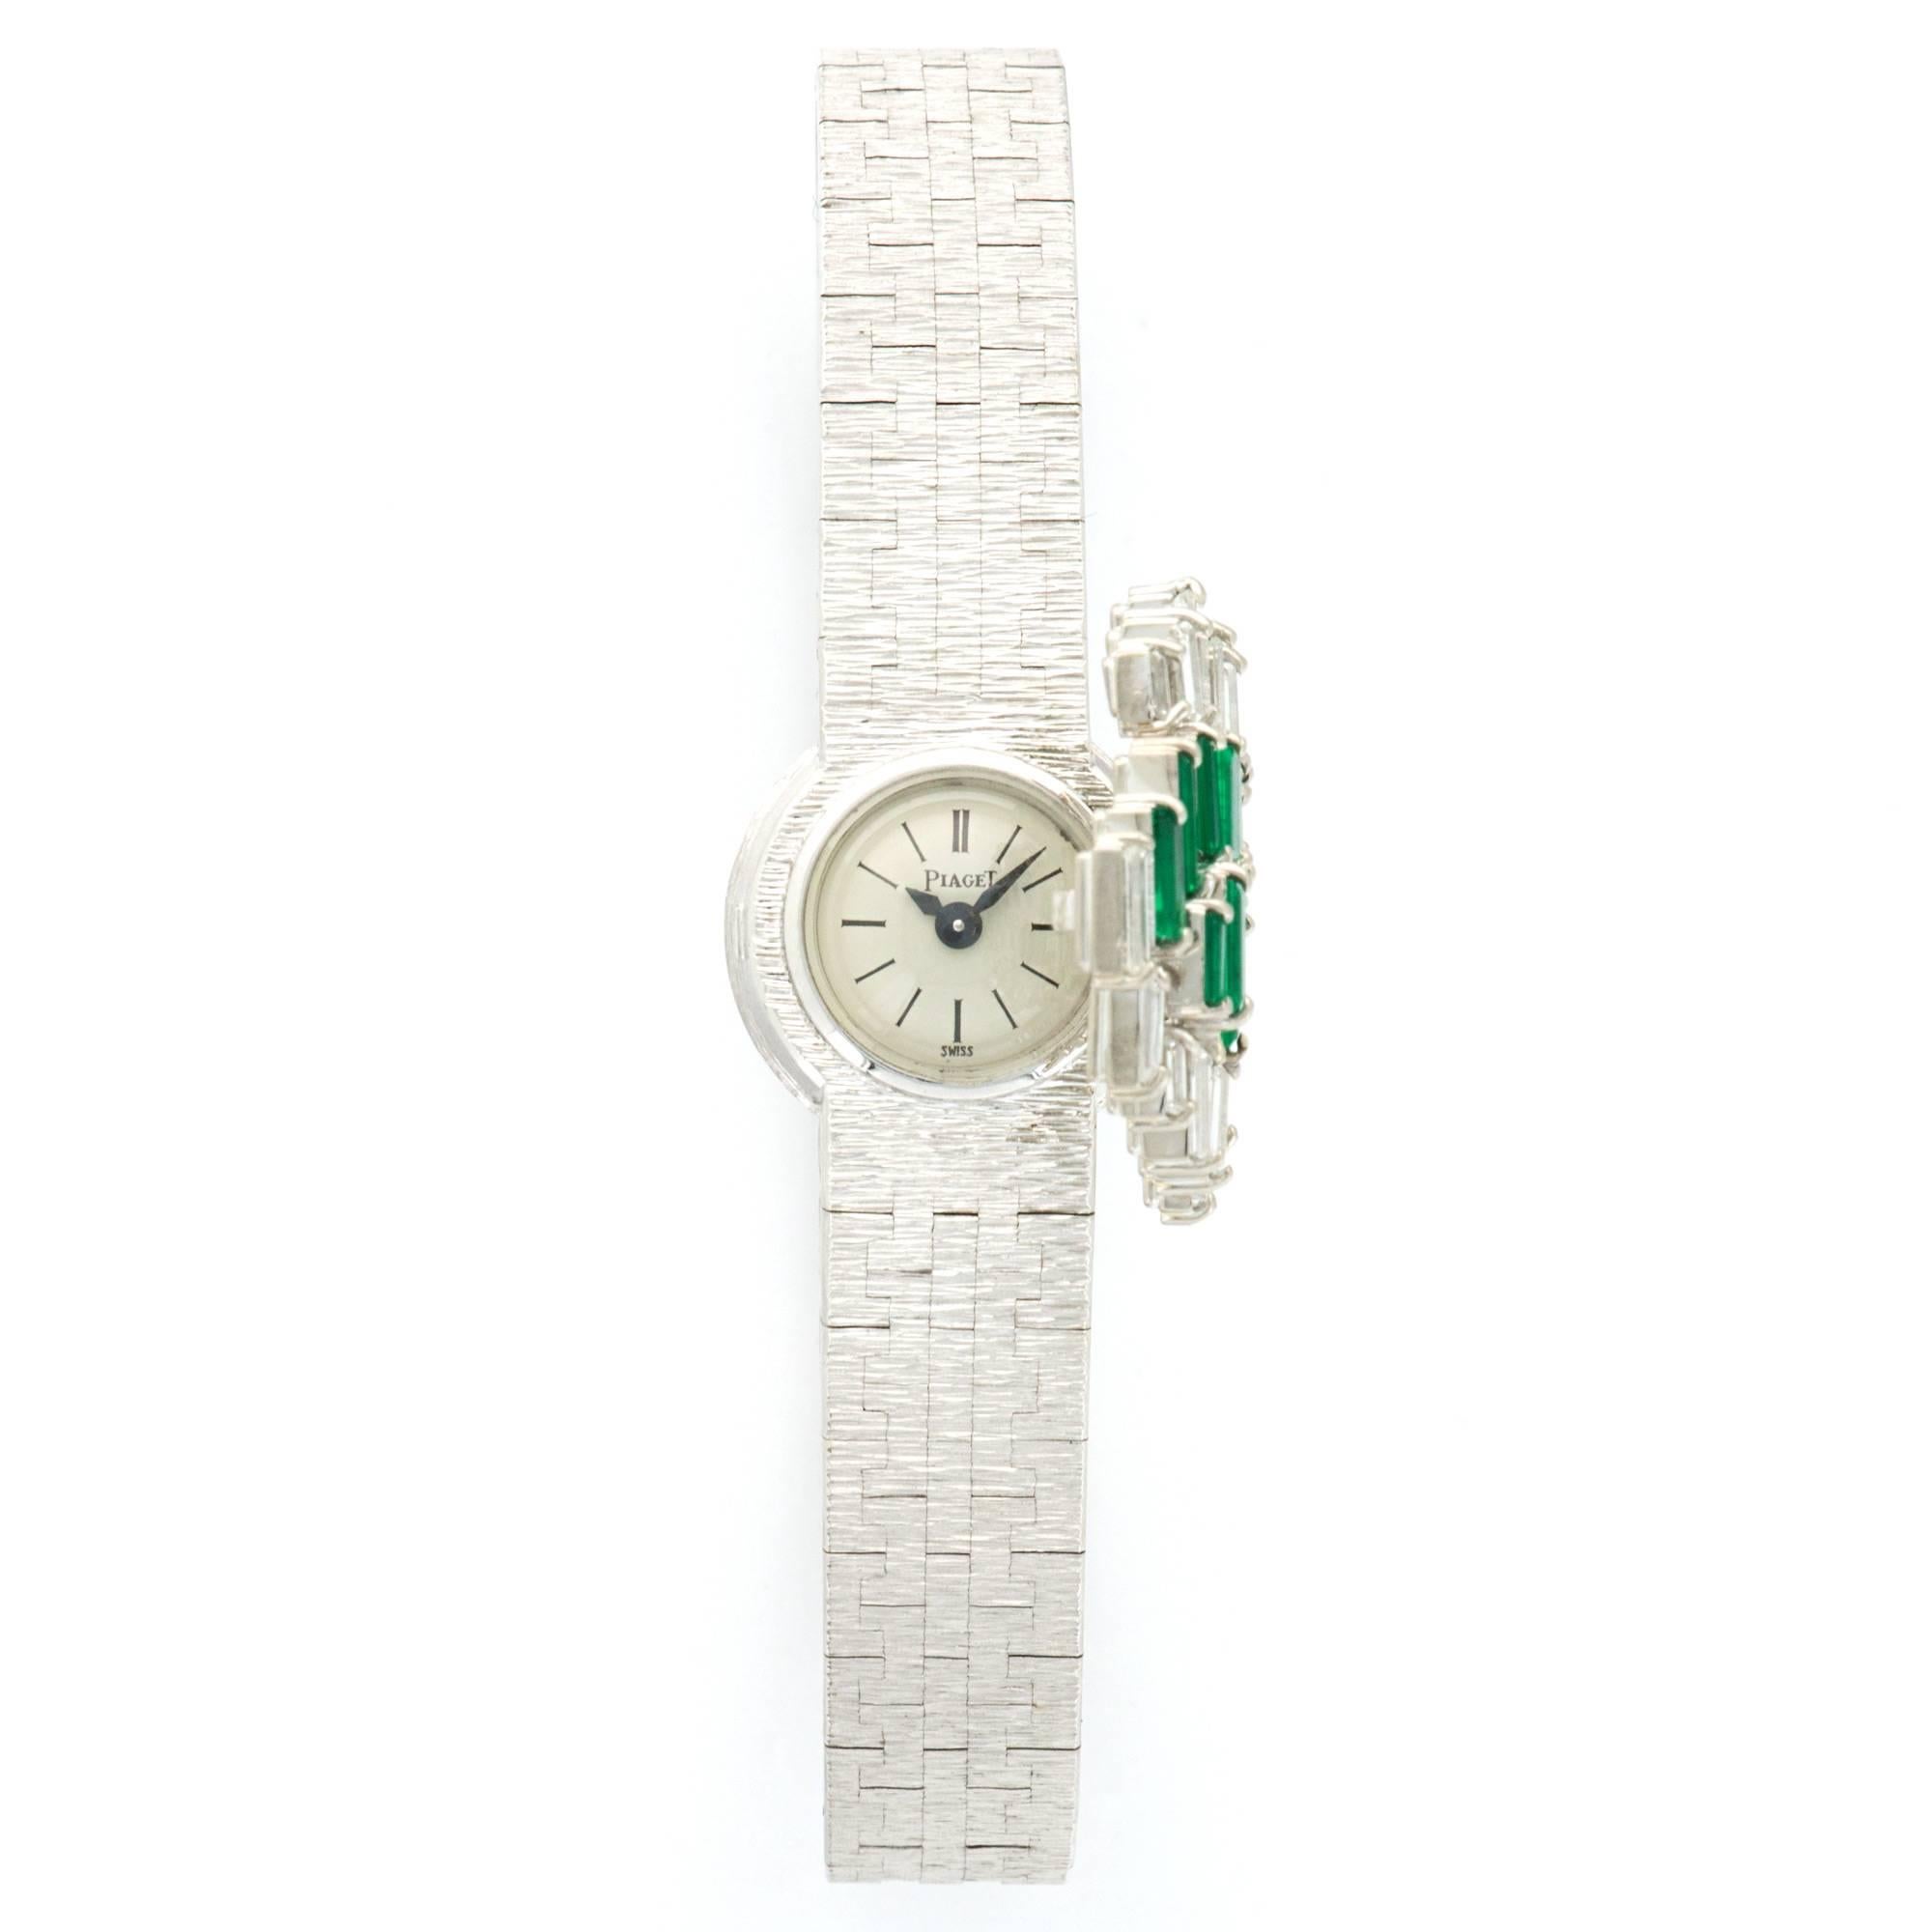 A Beautiful and Delicate White Gold Diamond & Emerald Cover Watch by Piaget.

Circa 1970s.

Manual Wind Movement.

Ref. 3288